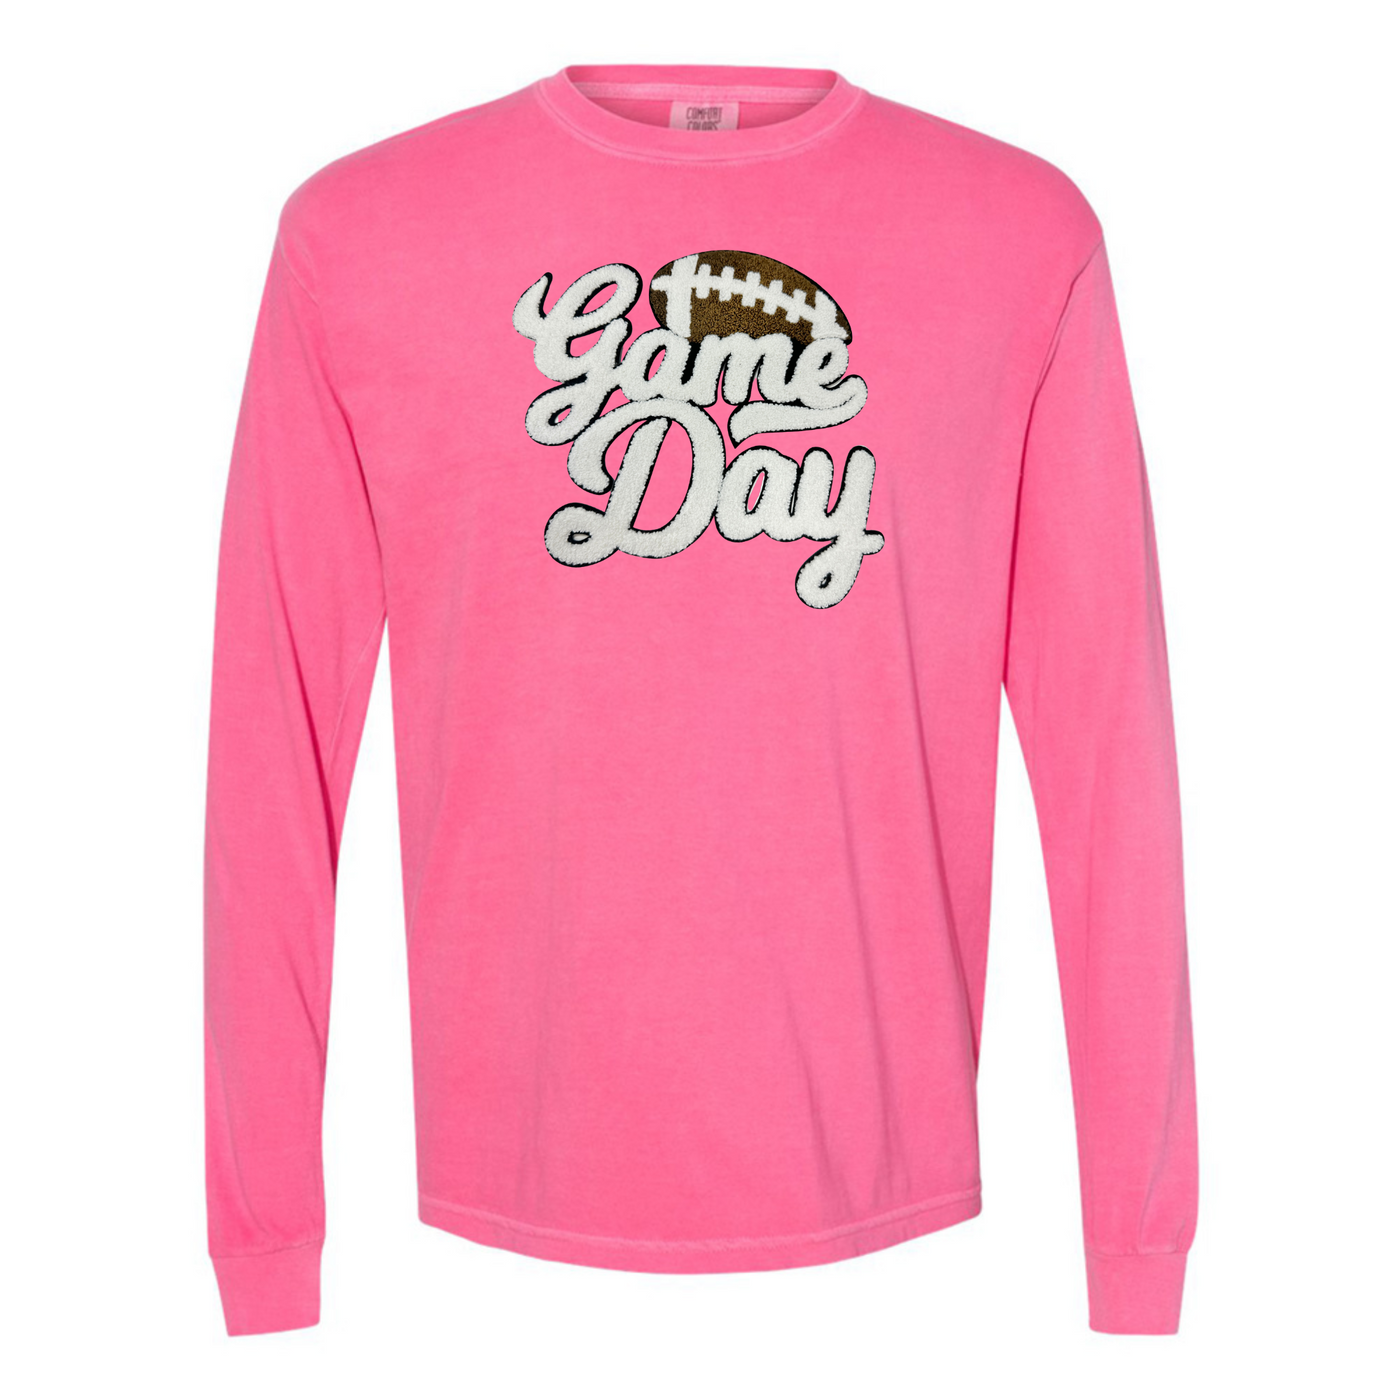 Football 'Game Day' Letter Patch Long Sleeve T-Shirt